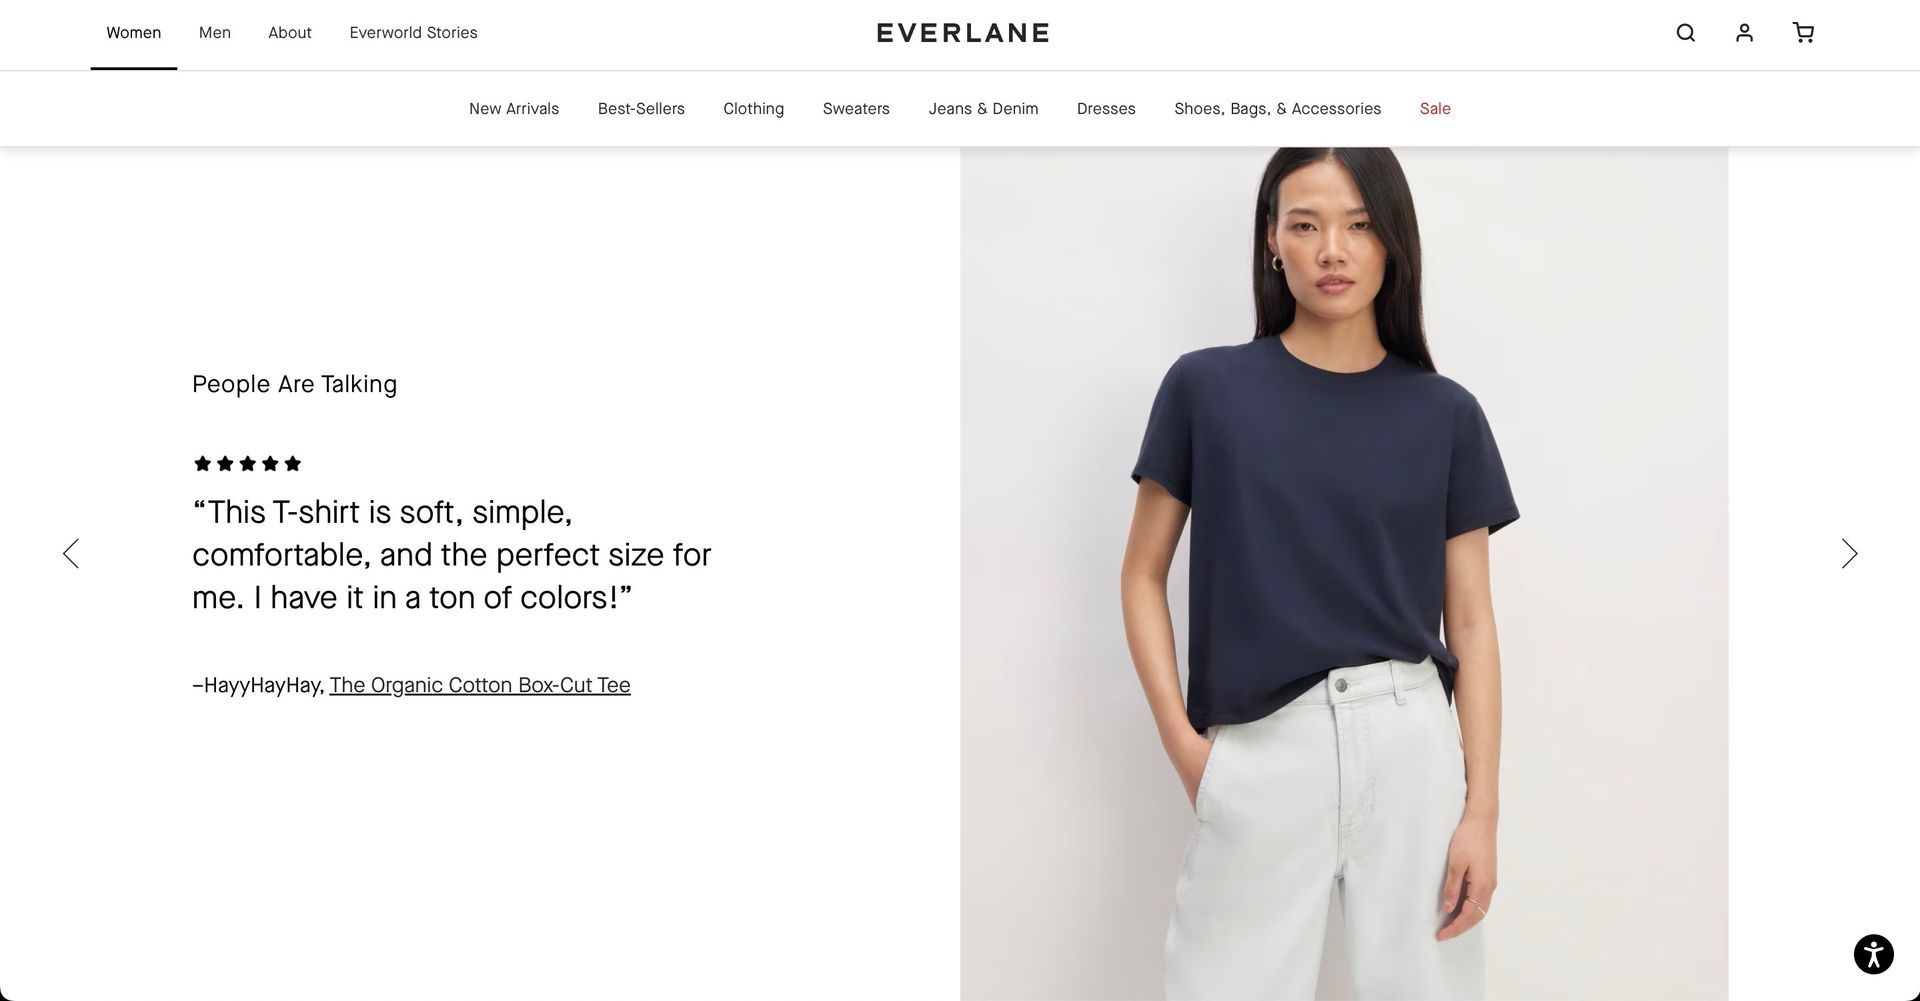 A screenshot of a website presenting a woman is wearing a blue t-shirt and white pants with her review of the product next to her